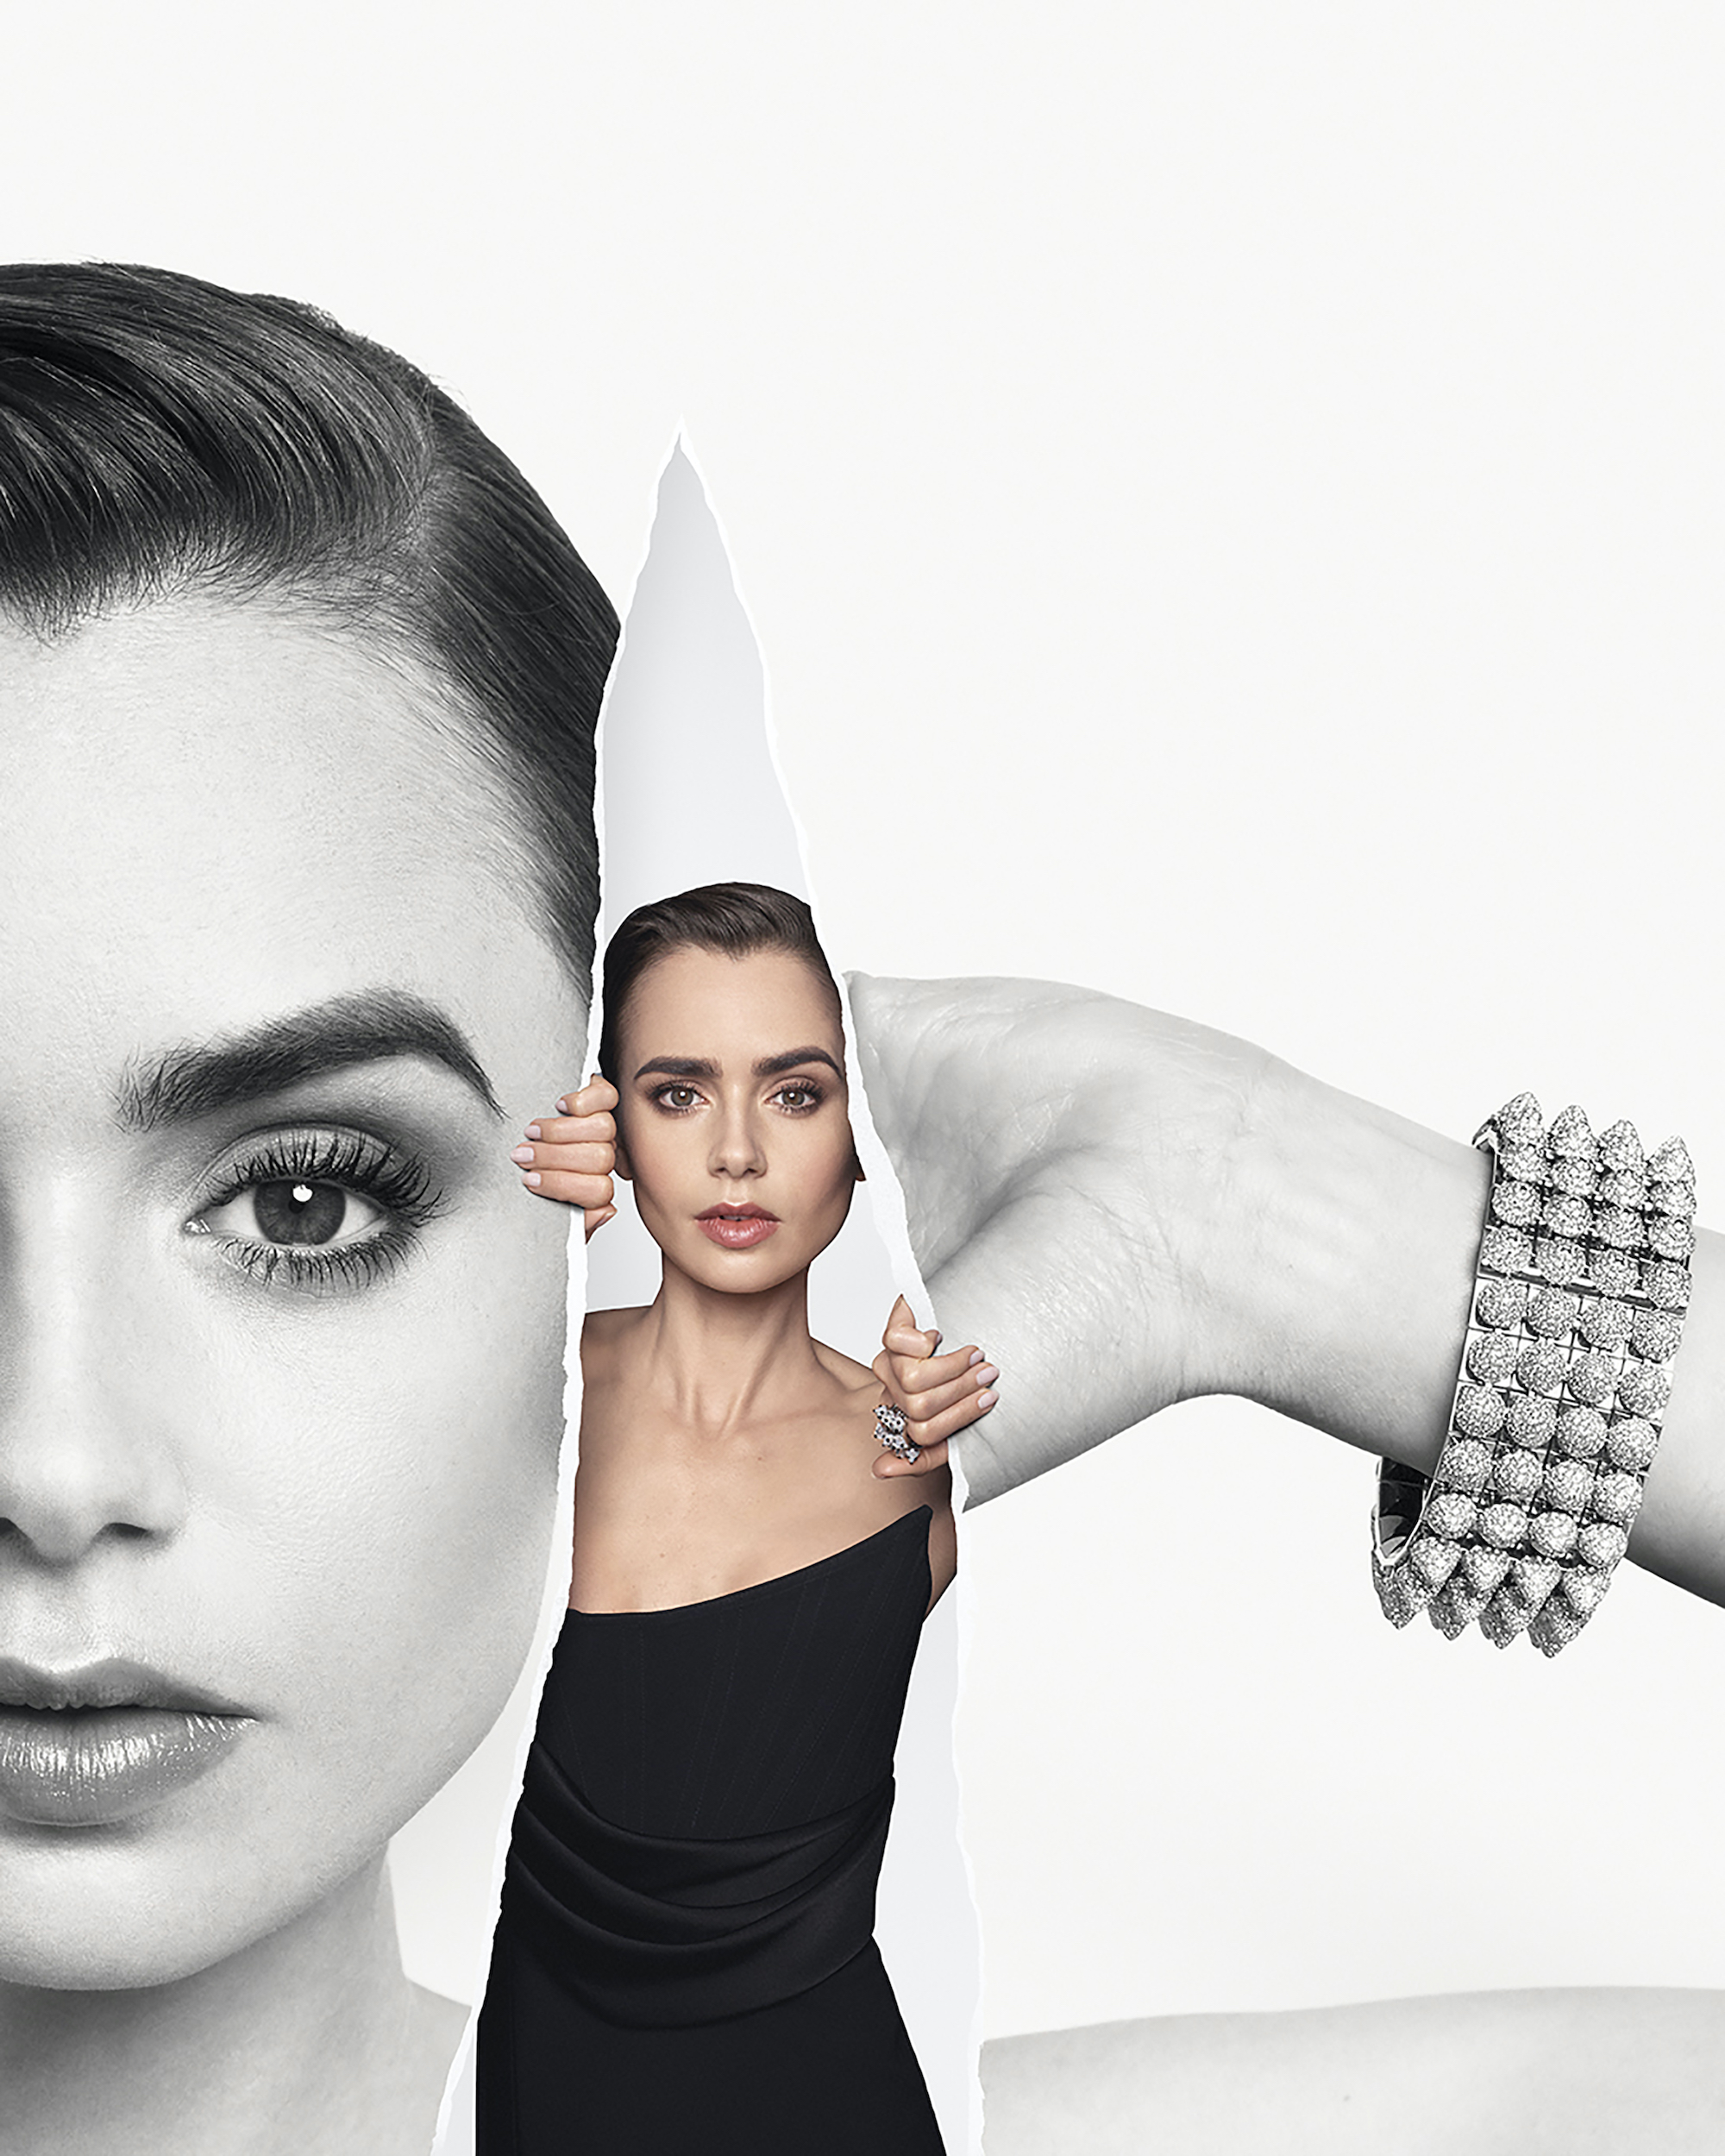  Lily Collins | Courtesy of Cartier